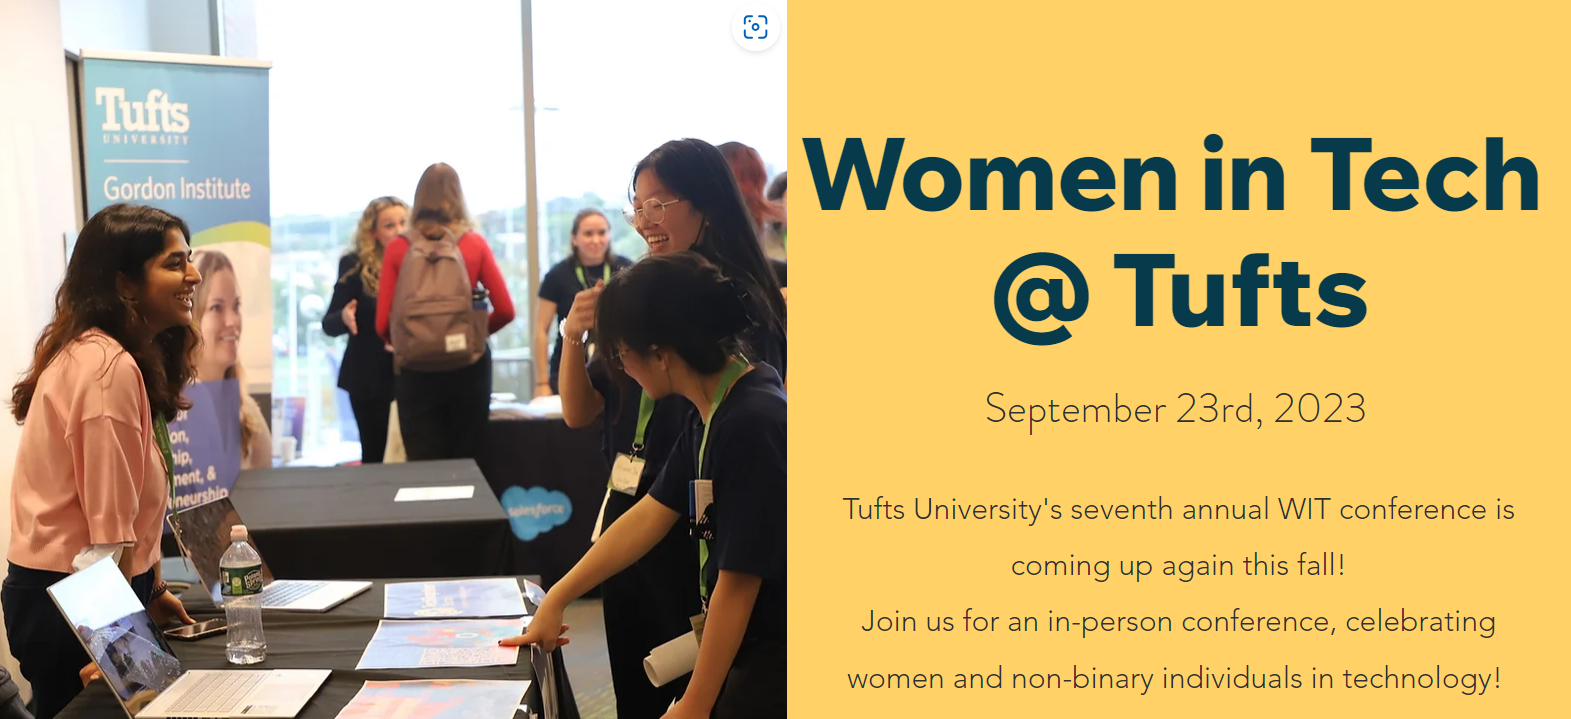 Tufts Women in Tech event banner